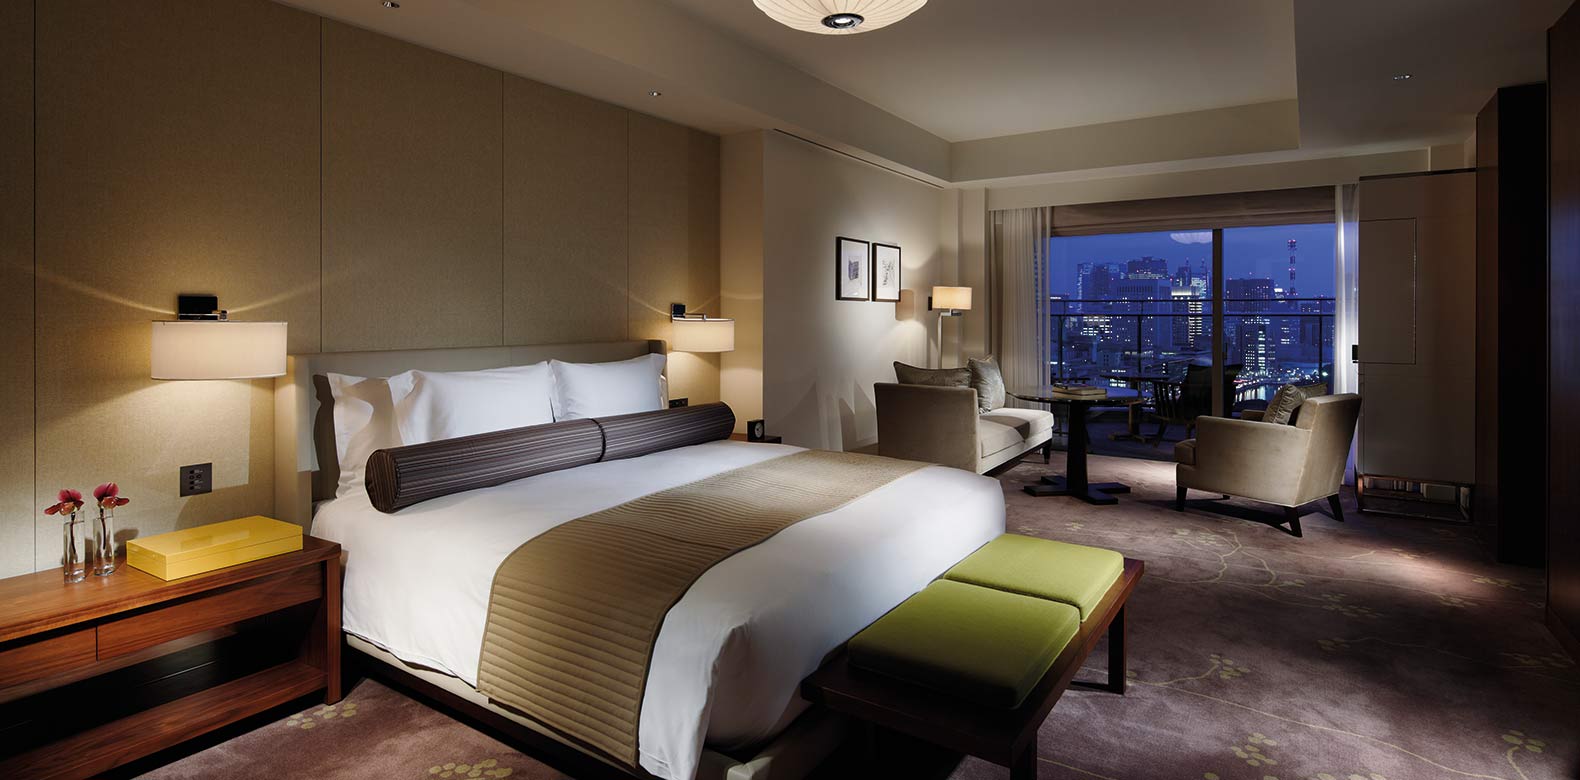 Palace Hotel Tokyo | Marunouchi Accommodation | Grand Deluxe Rooms